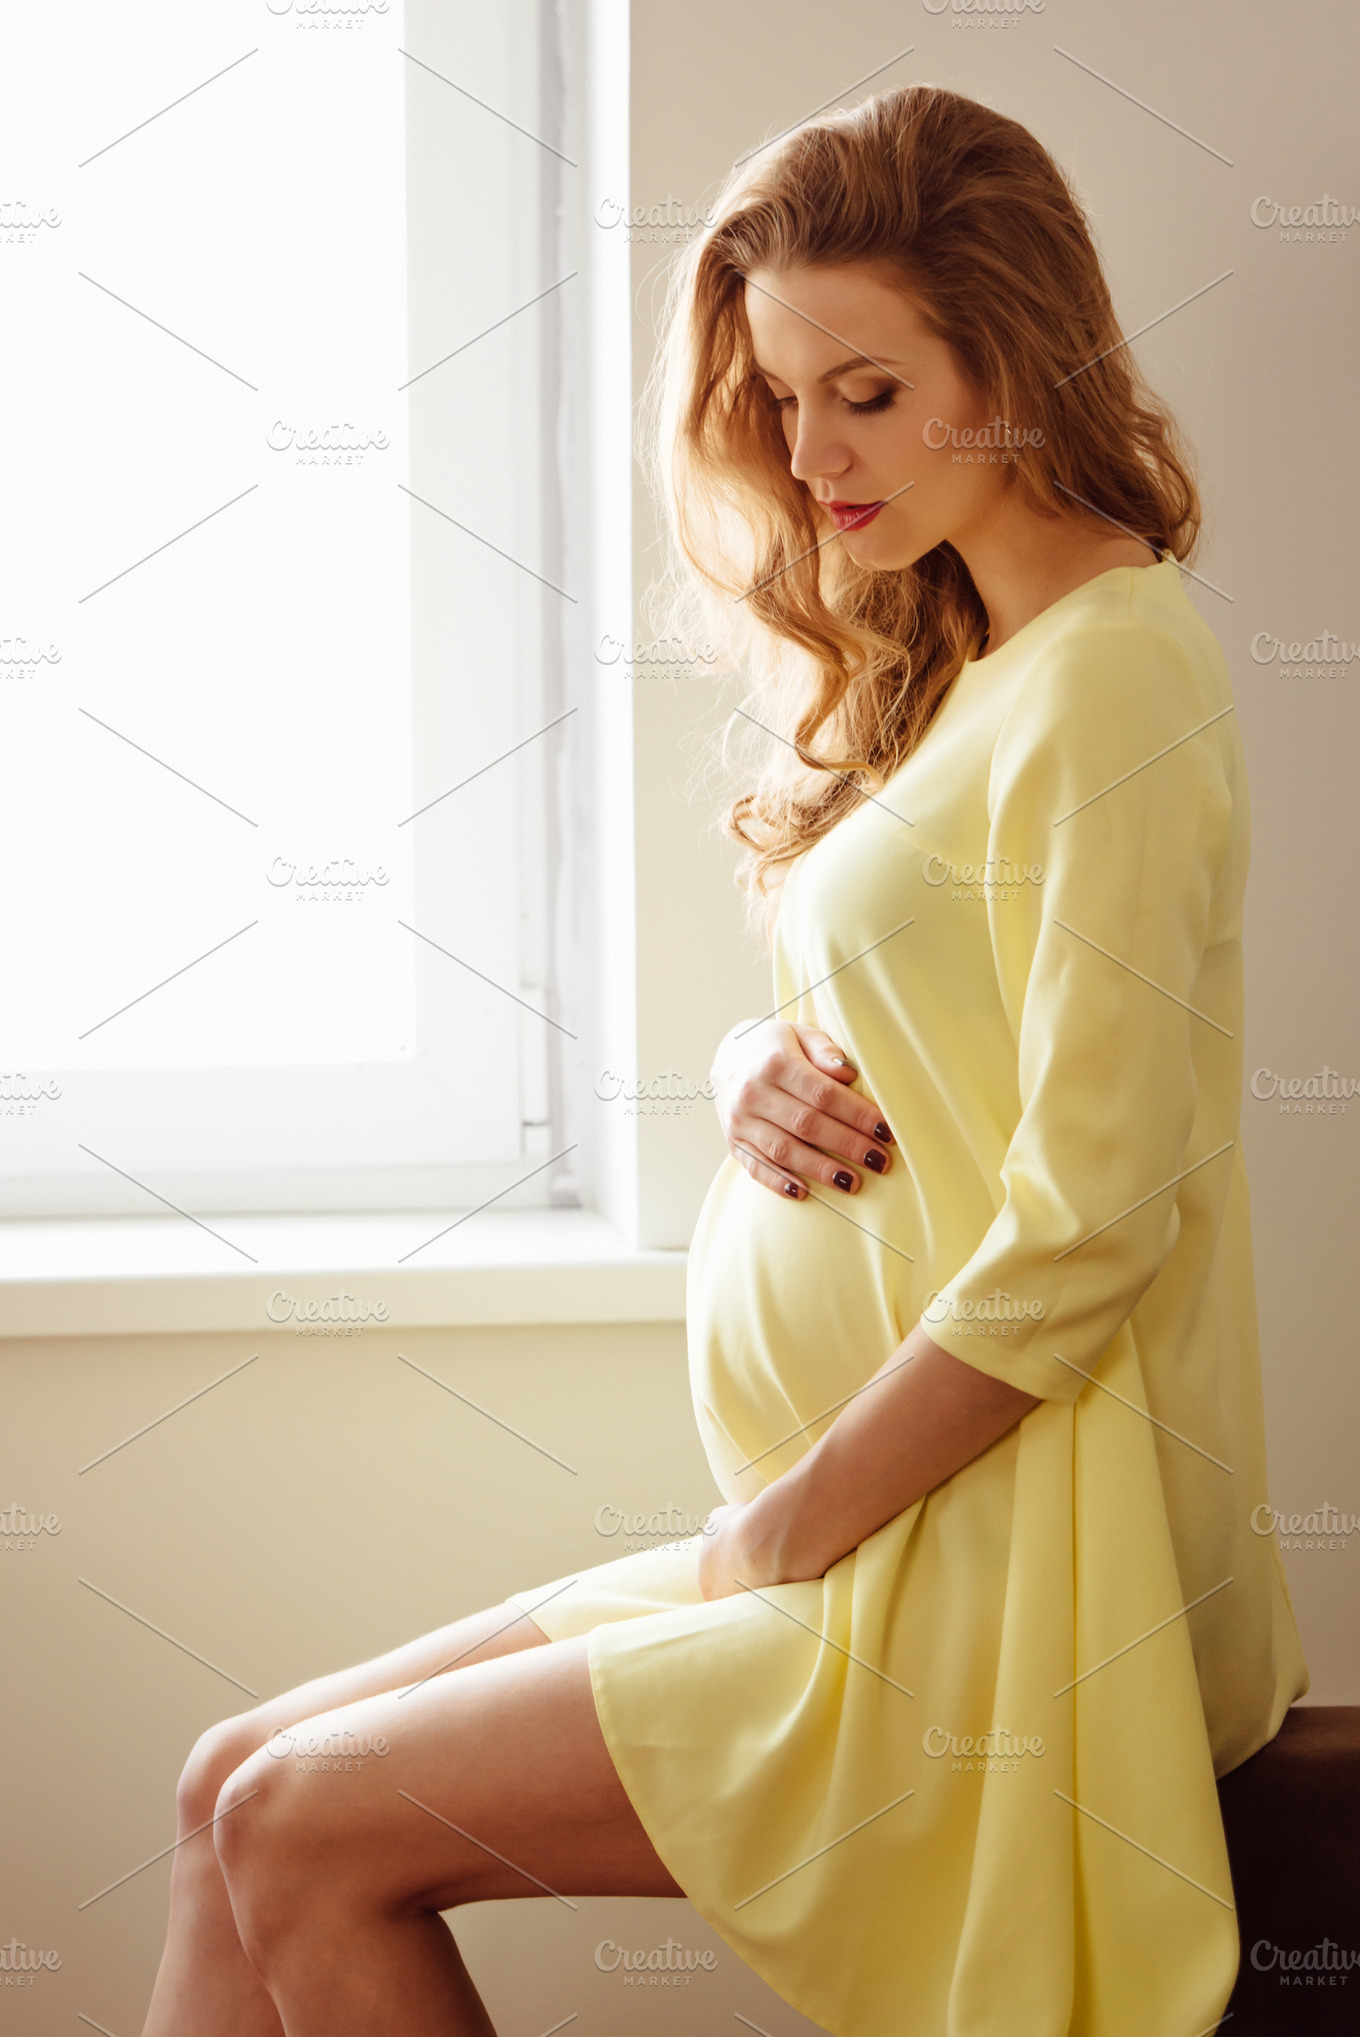 Beautiful Pregnant Girl High Quality People Images ~ Creative Market